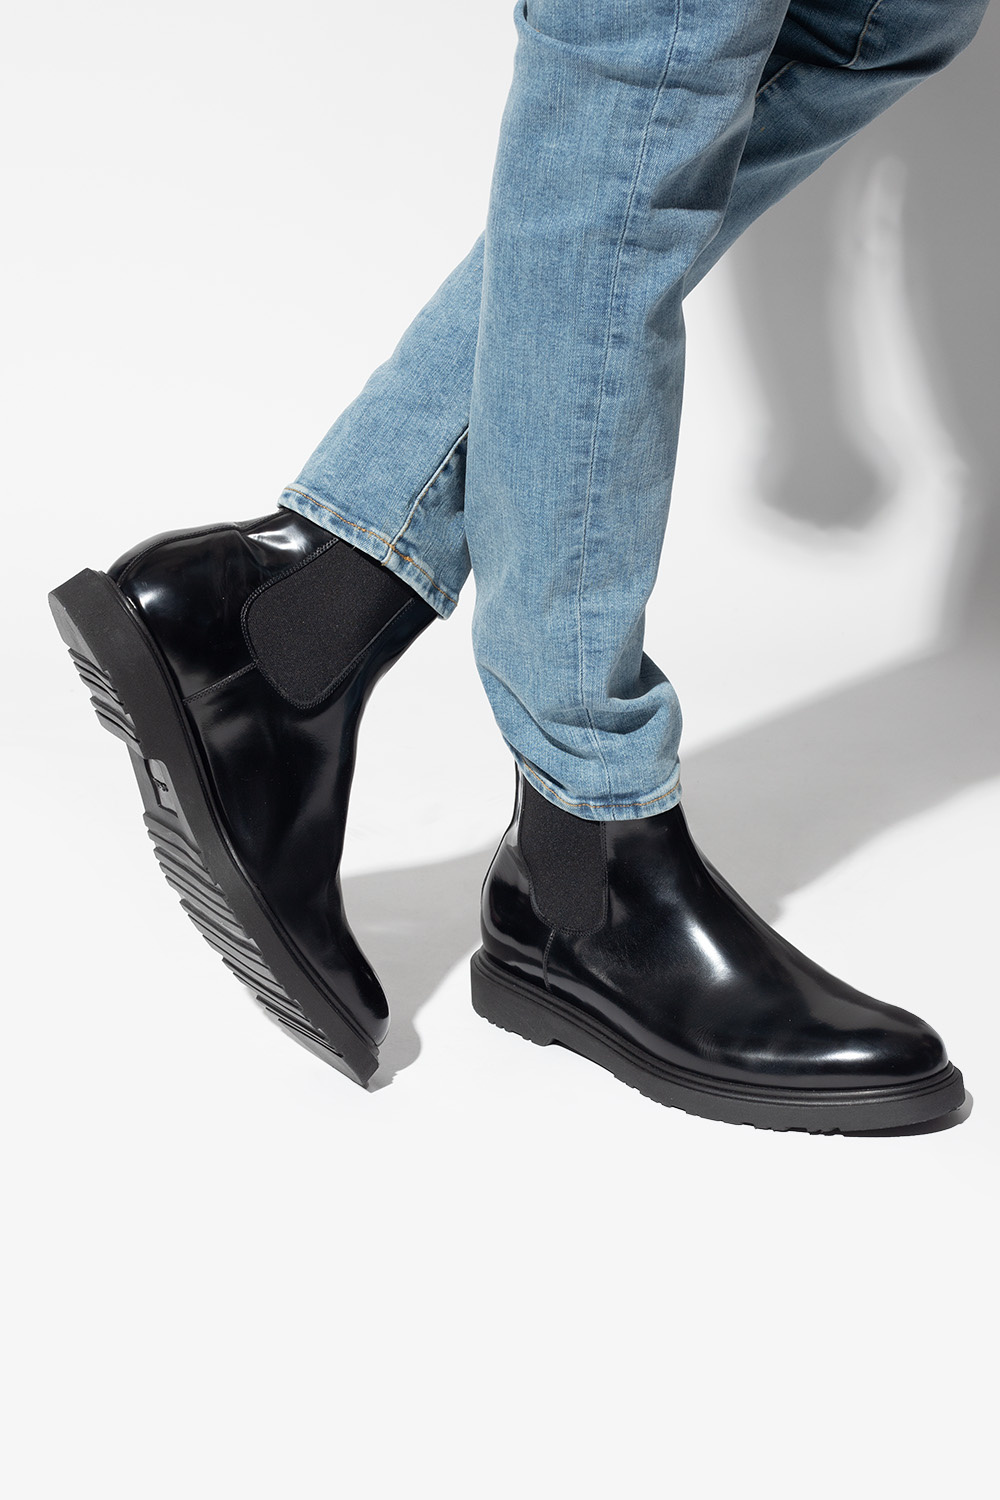 Paul Smith Leather Chelsea boots